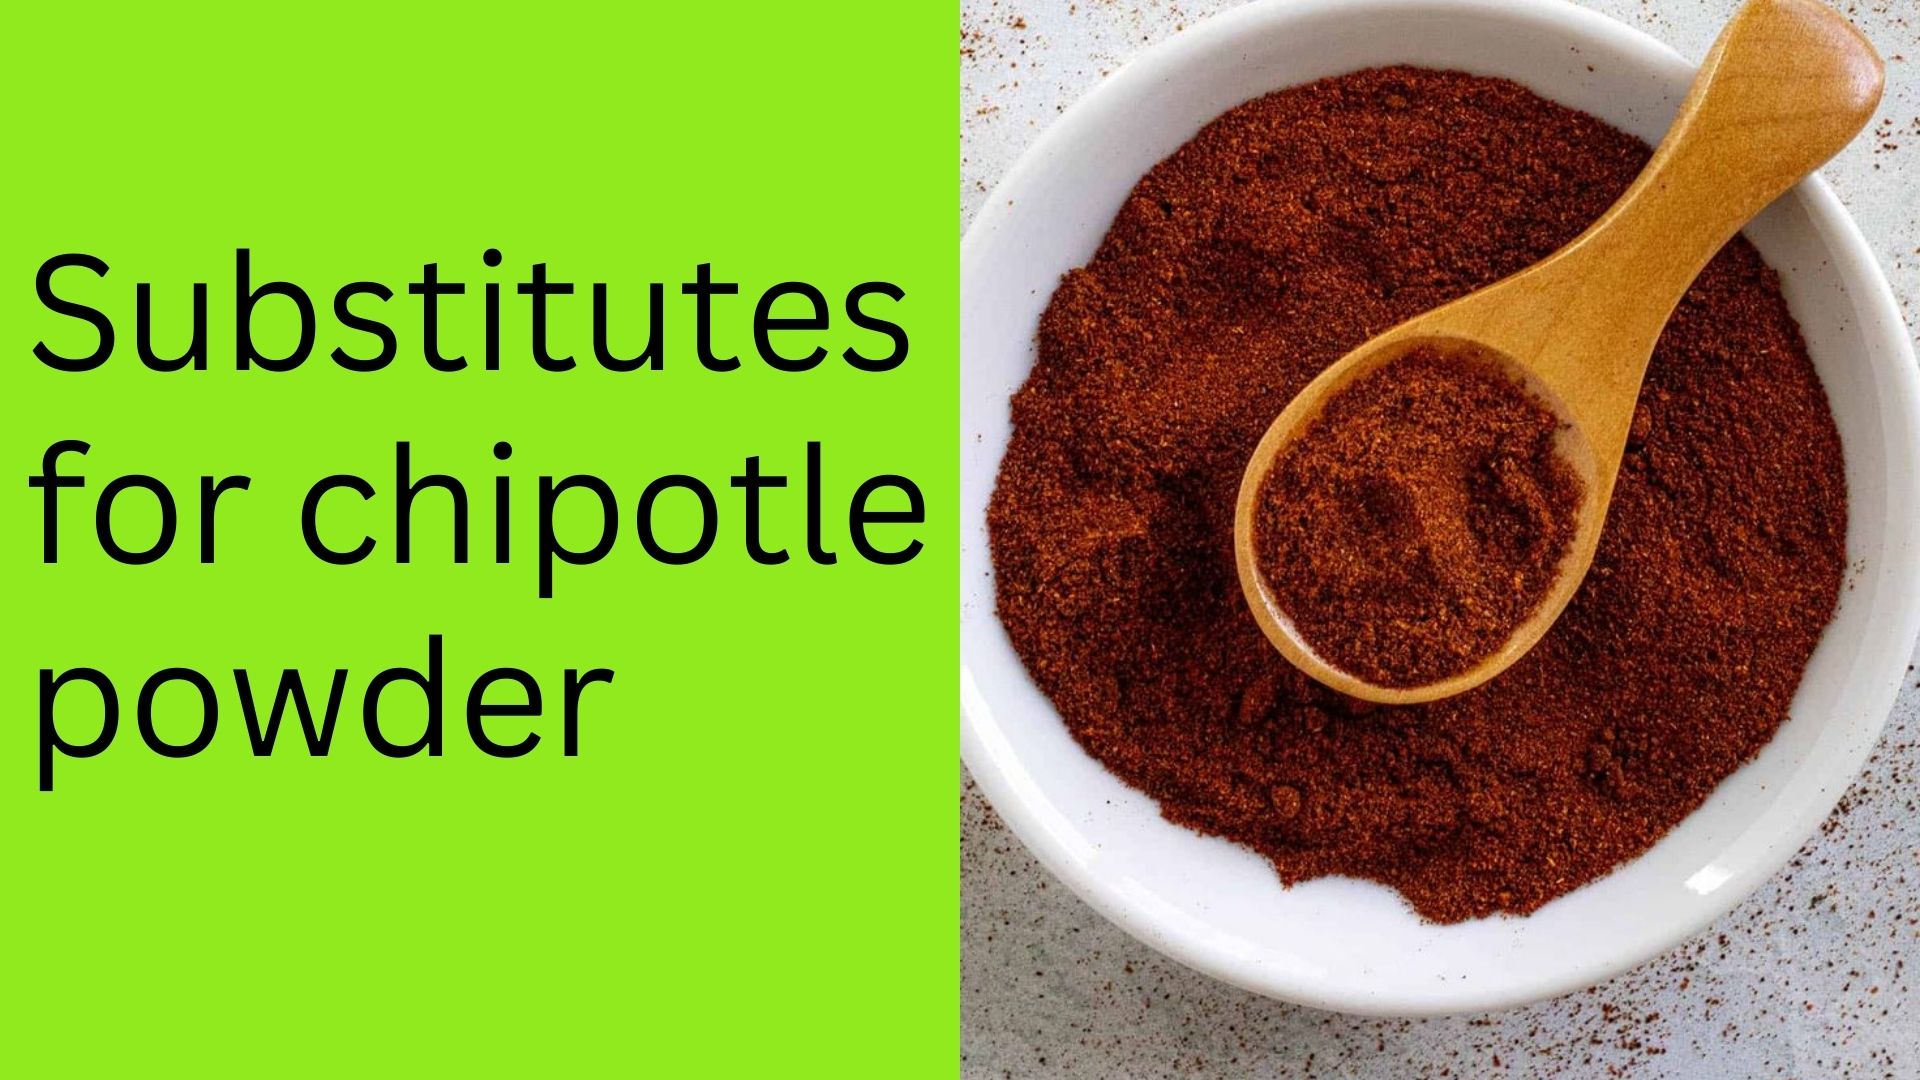 Substitutes for chipotle powder